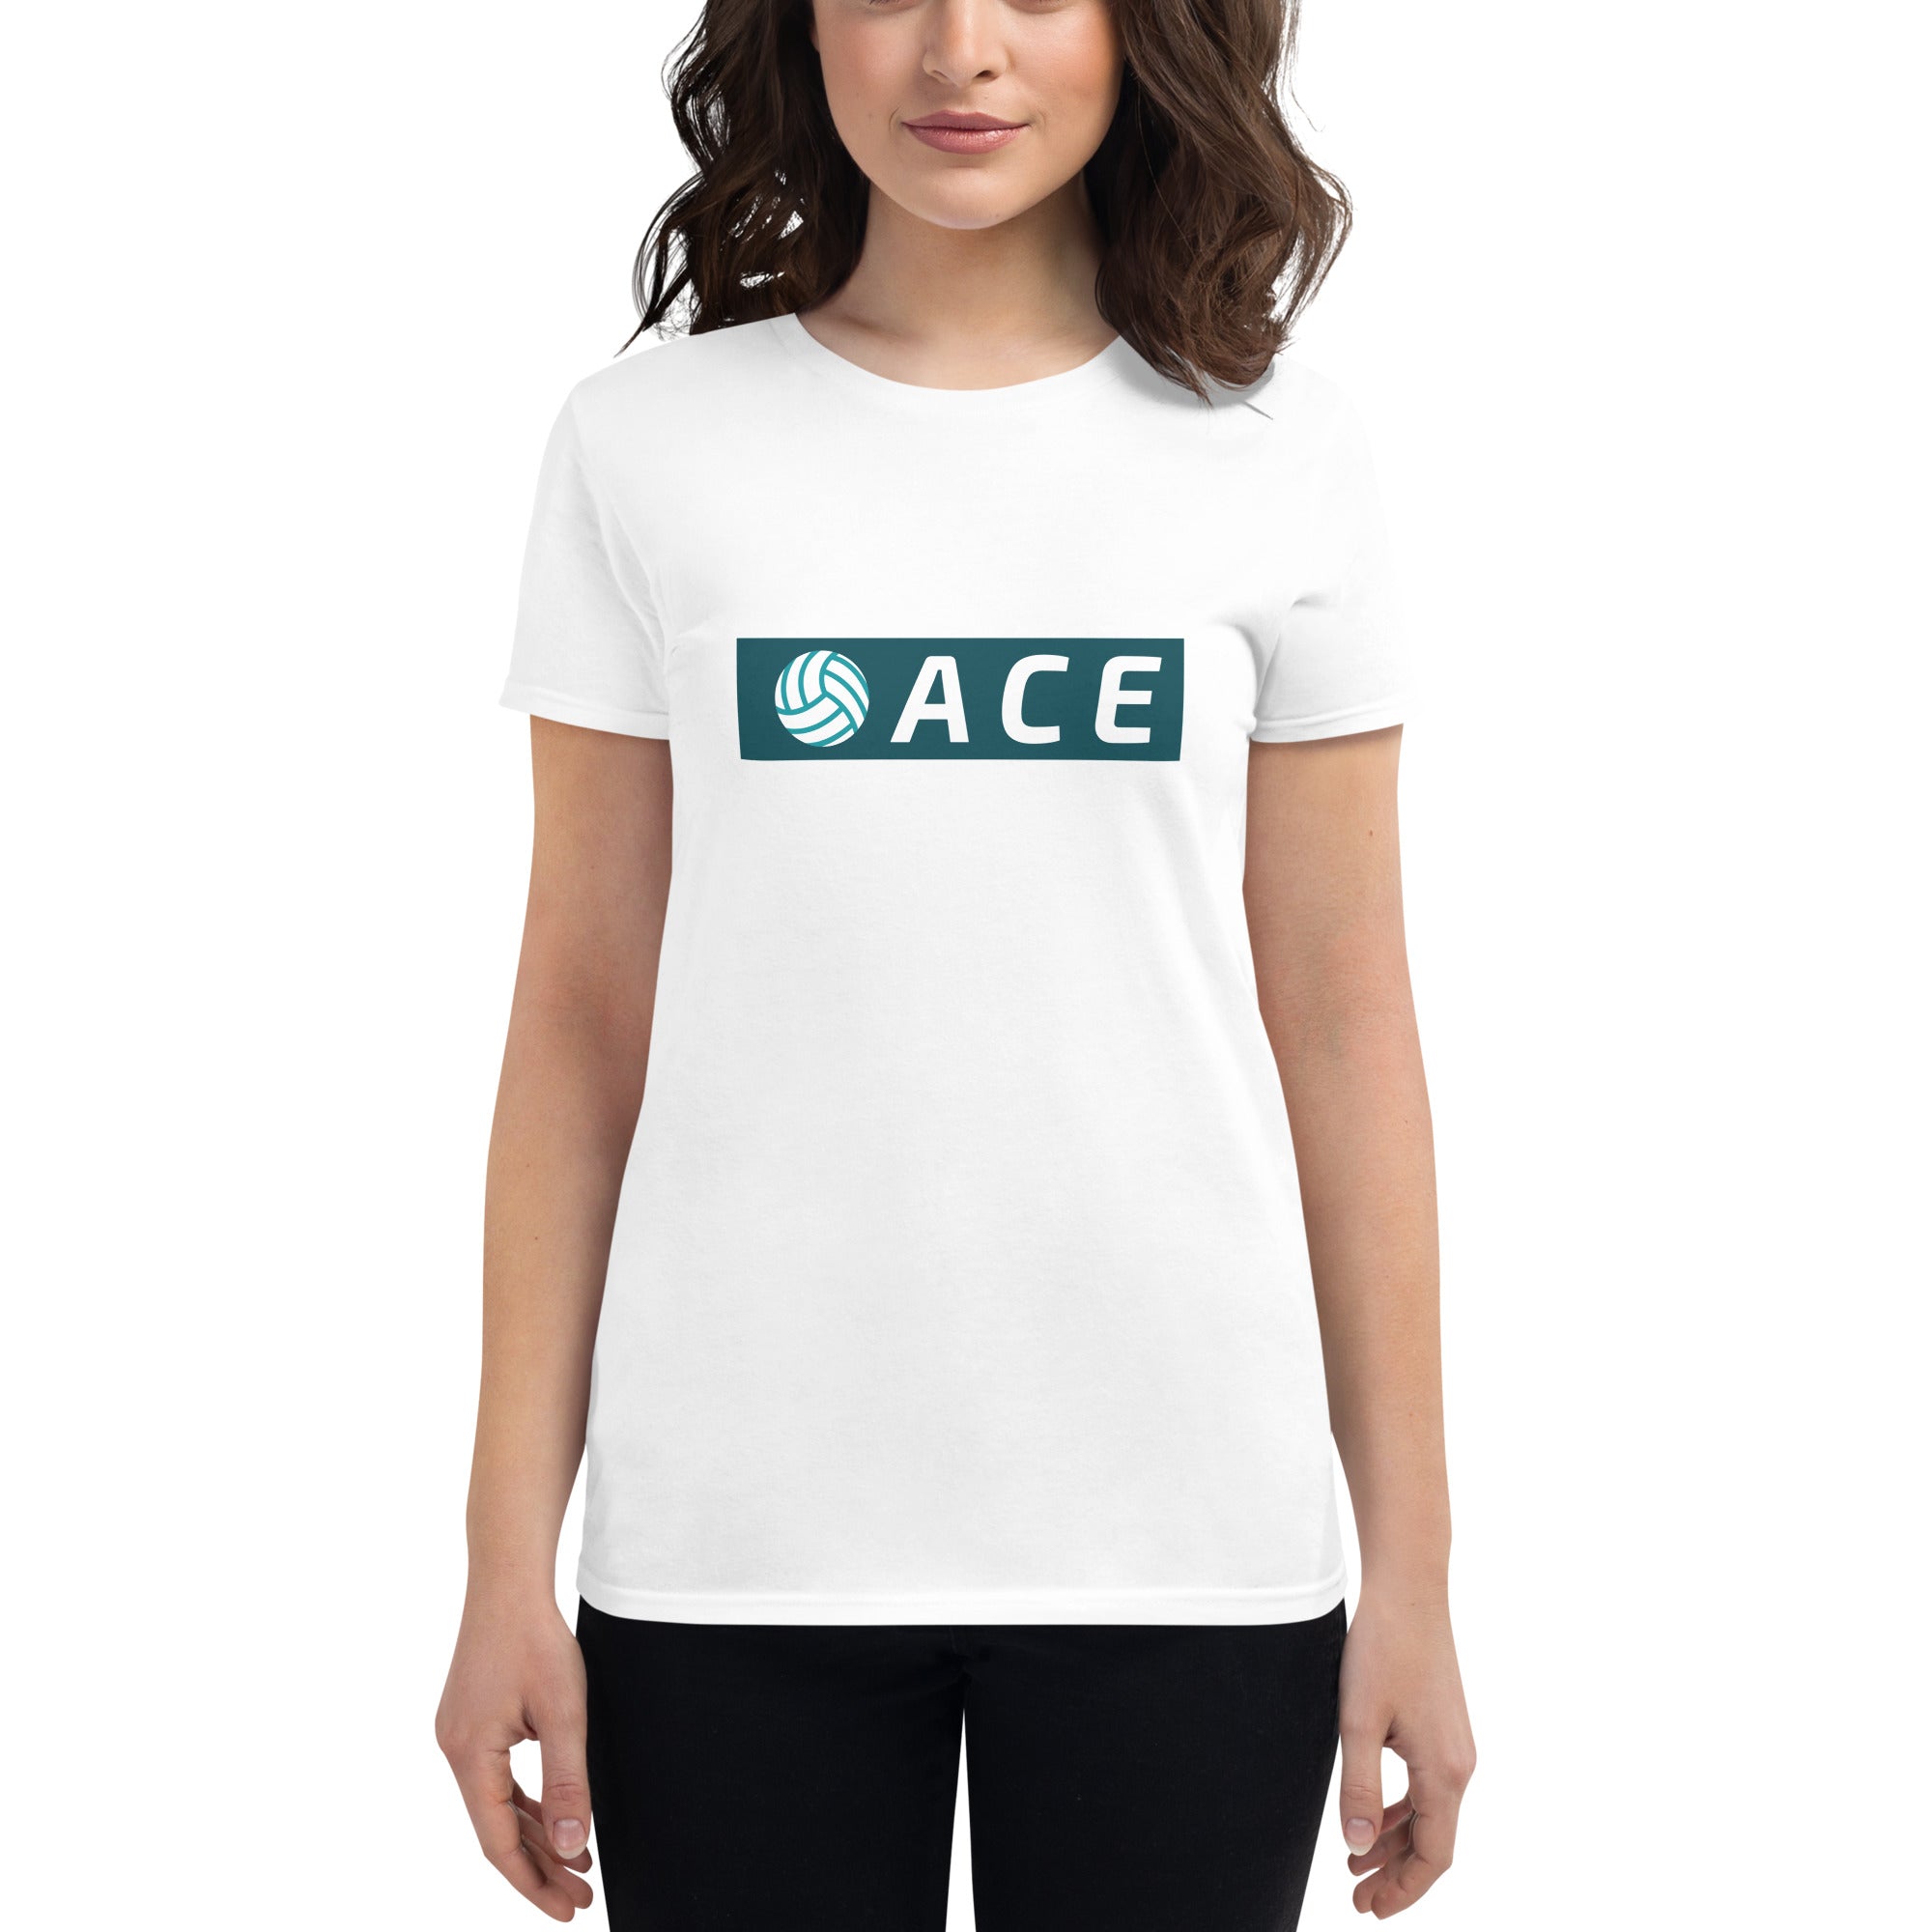 Ace Women's Fitted T-Shirt